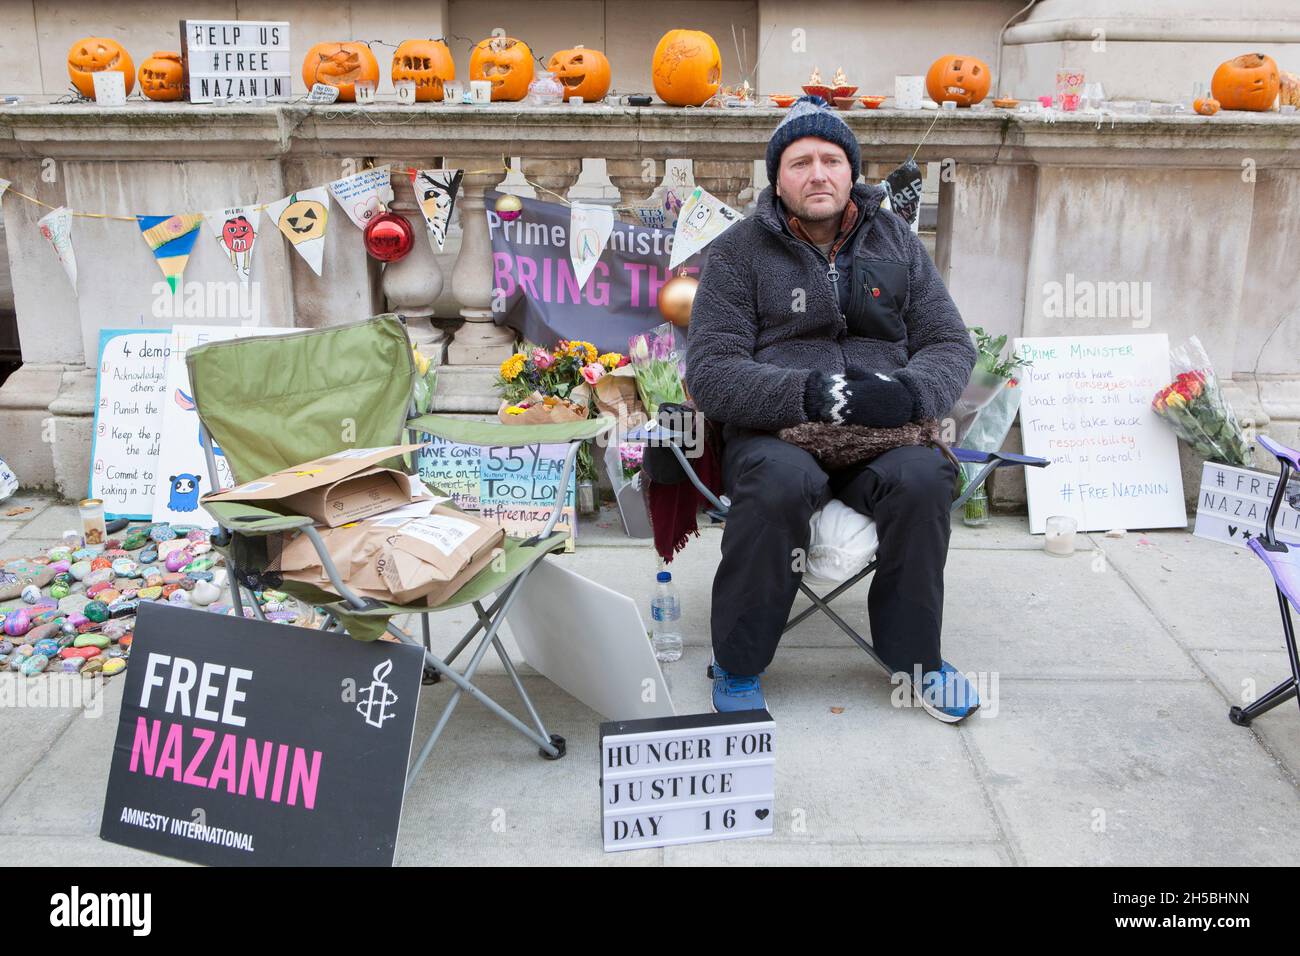 London, UK, 8 November 2021: Day 16 of Richard Ratcliffe's hunger strike to end government inaction over his wife Nazanin's incarceration in Iran. He is showing remarkable good spirits as he continues camping in Whitehall outside the Foreign Office to campaign for them to take action to secure Nazanin Zaghari-Ratcliffe's release. Amnesty International are supporting his campaign and that for other dual nationality citizens imprisoned in Iran. Anna Watson/Alamy Live News Stock Photo